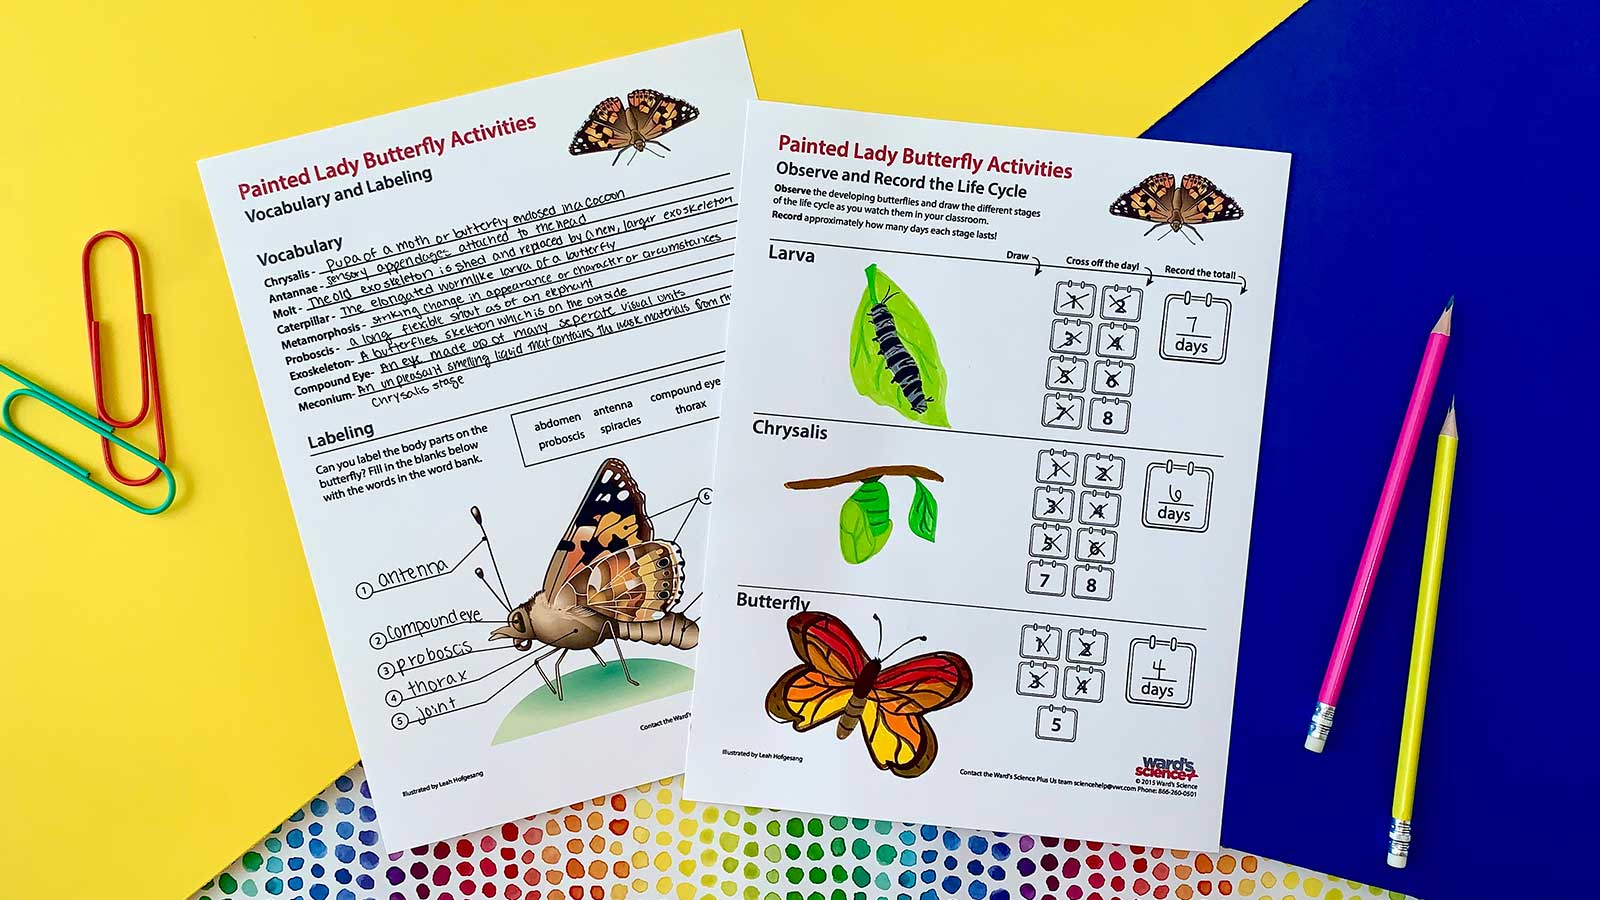 Painted Lady Butterfly worksheets filled out by student on desk with pencils and paperclips